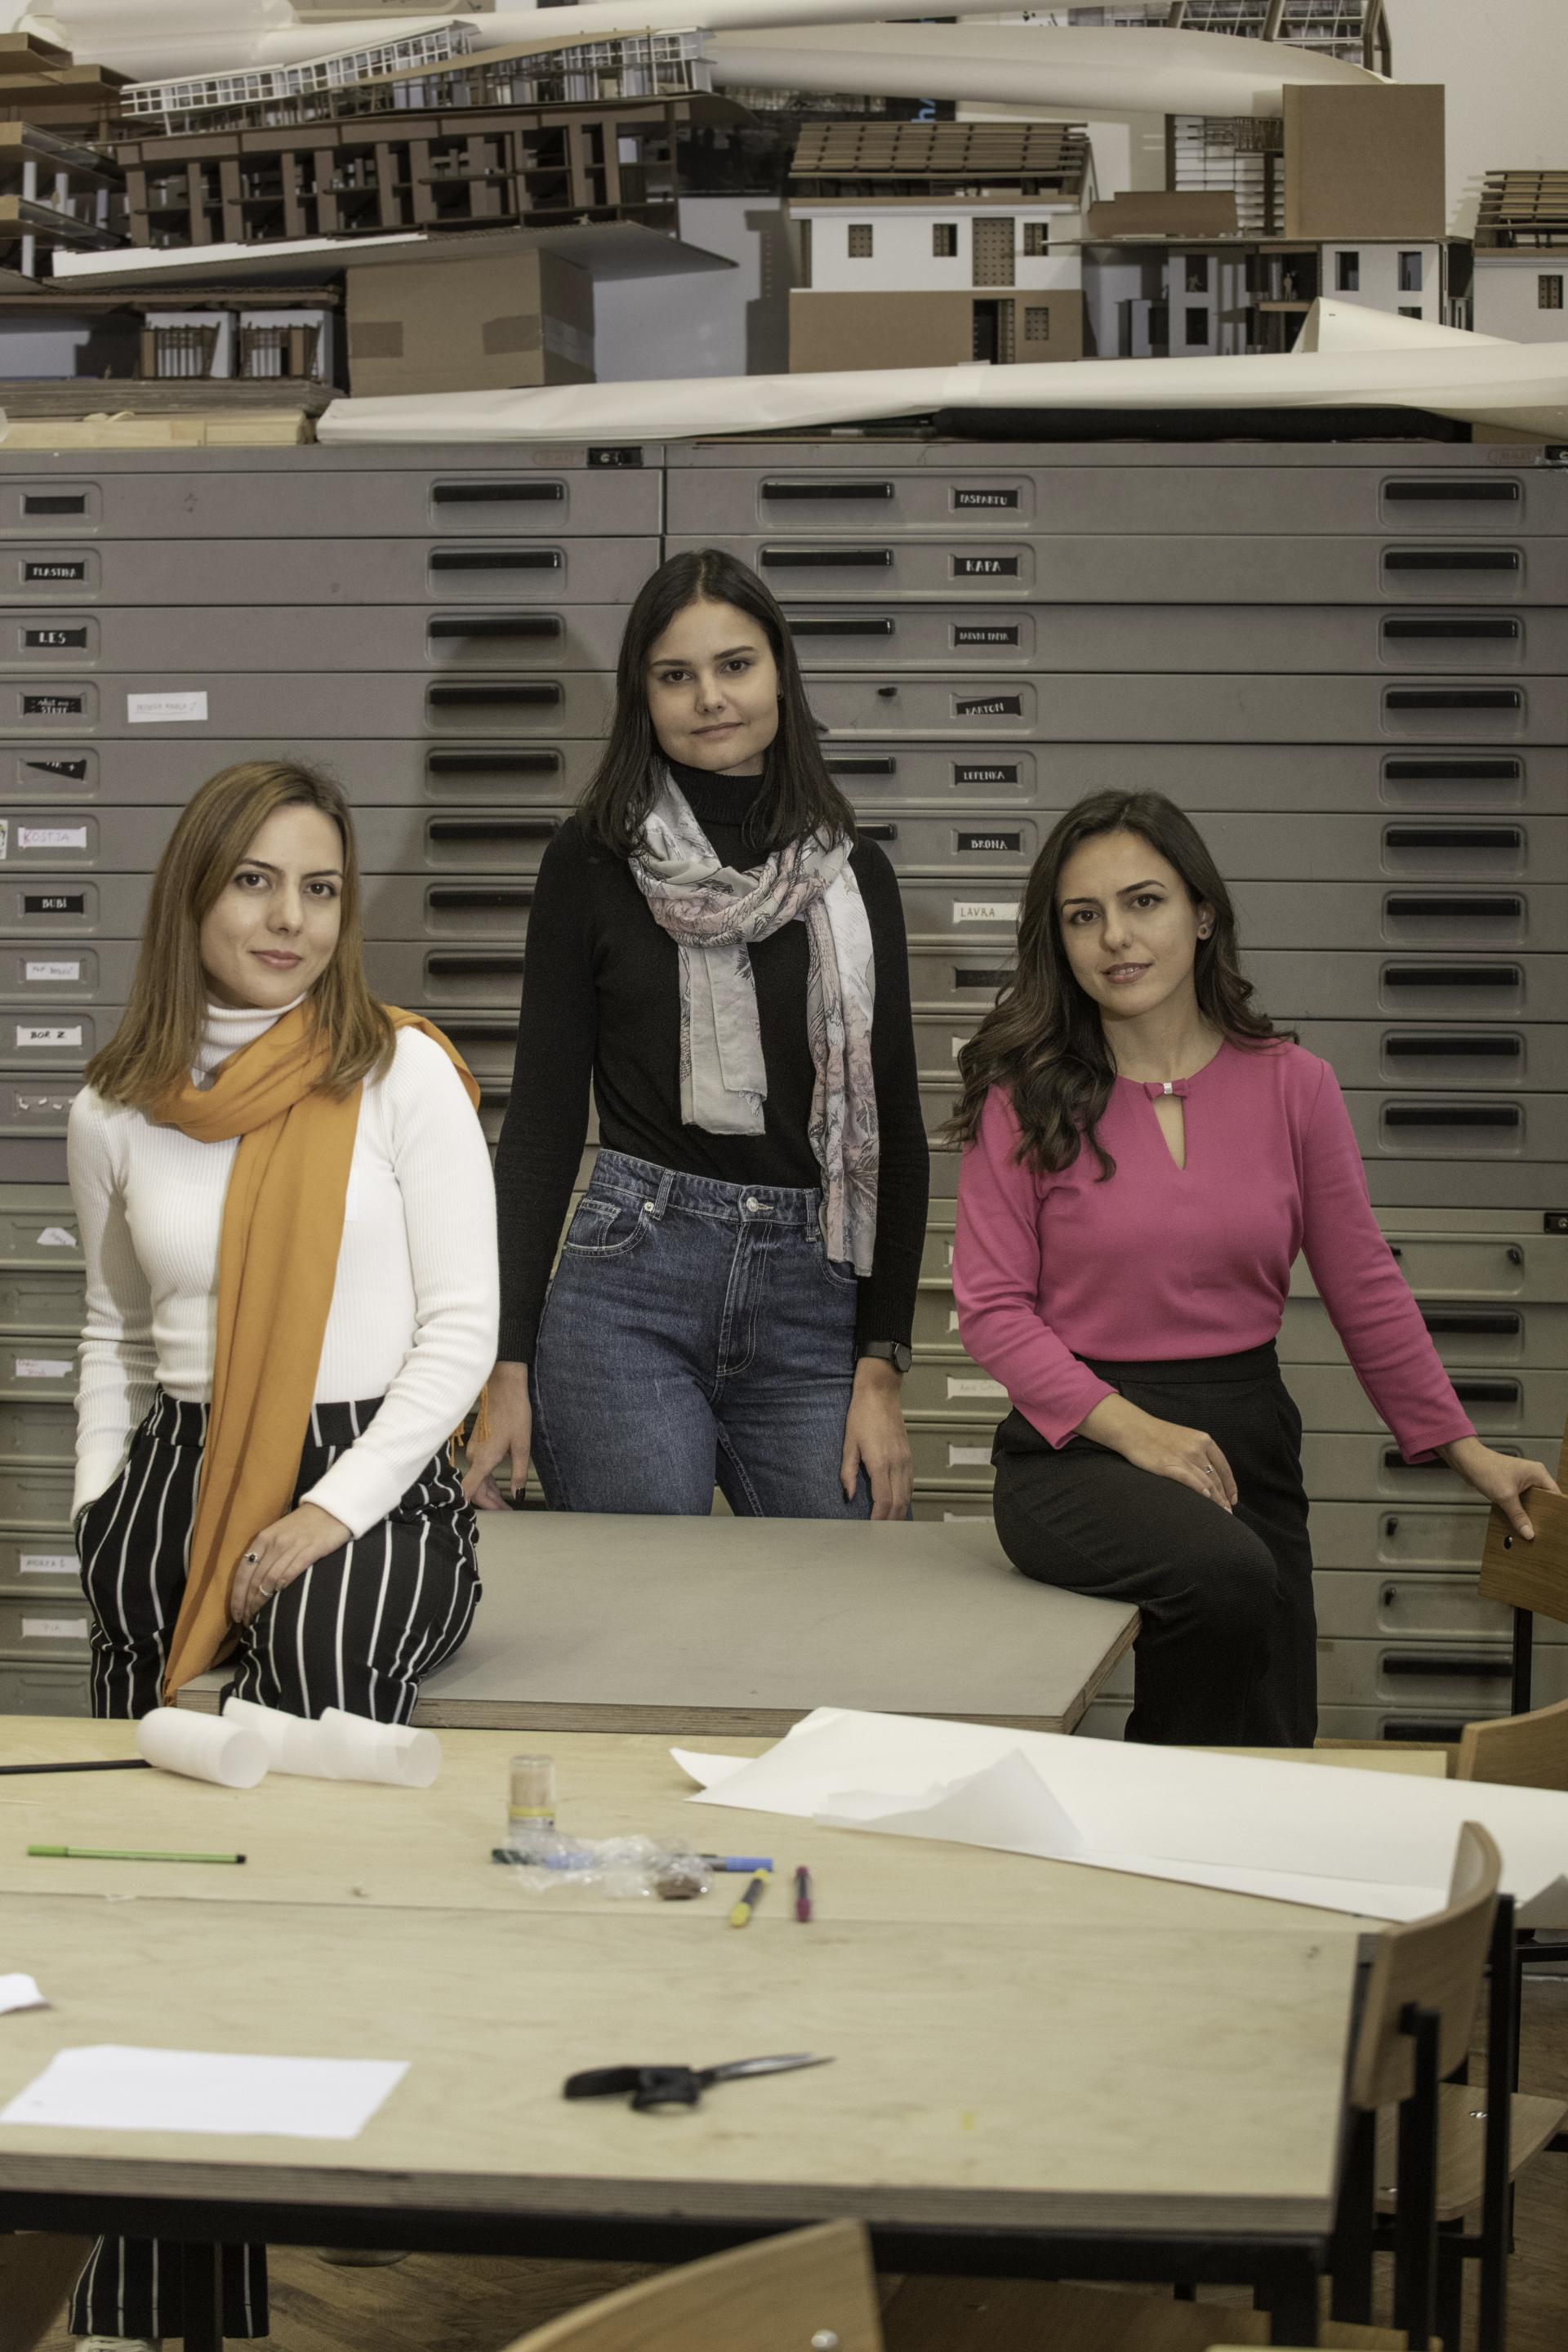 Puzzle is a collective established in 2018. Adelina Fejza, Sanja Avramoska, Irena Lazarev and Valbona Fejza brings together a diverse range of skills and experiences to create unique architectural solutions. They received an Honorable Mention in the Shinkenchiku Residential Design Competition 2019 for "Living in The Future," and took second place in the competition for "Sports Centre Vllazerimi" organized by the municipality of Kichevo, Macedonia. They have also won first place in the international 24h ideas competition by Ideas Forward for the theme "Knowledge", the 1st prize in the "Industry in the City" competition awarded by the Faculty of Architecture, UKIM in Macedonia, and they won the 2nd place in the international 24h ideas competition by Ideas Forward for the theme "Ocean". They have been selected as fellows in the Future Architecture Platform and LINA Platform.